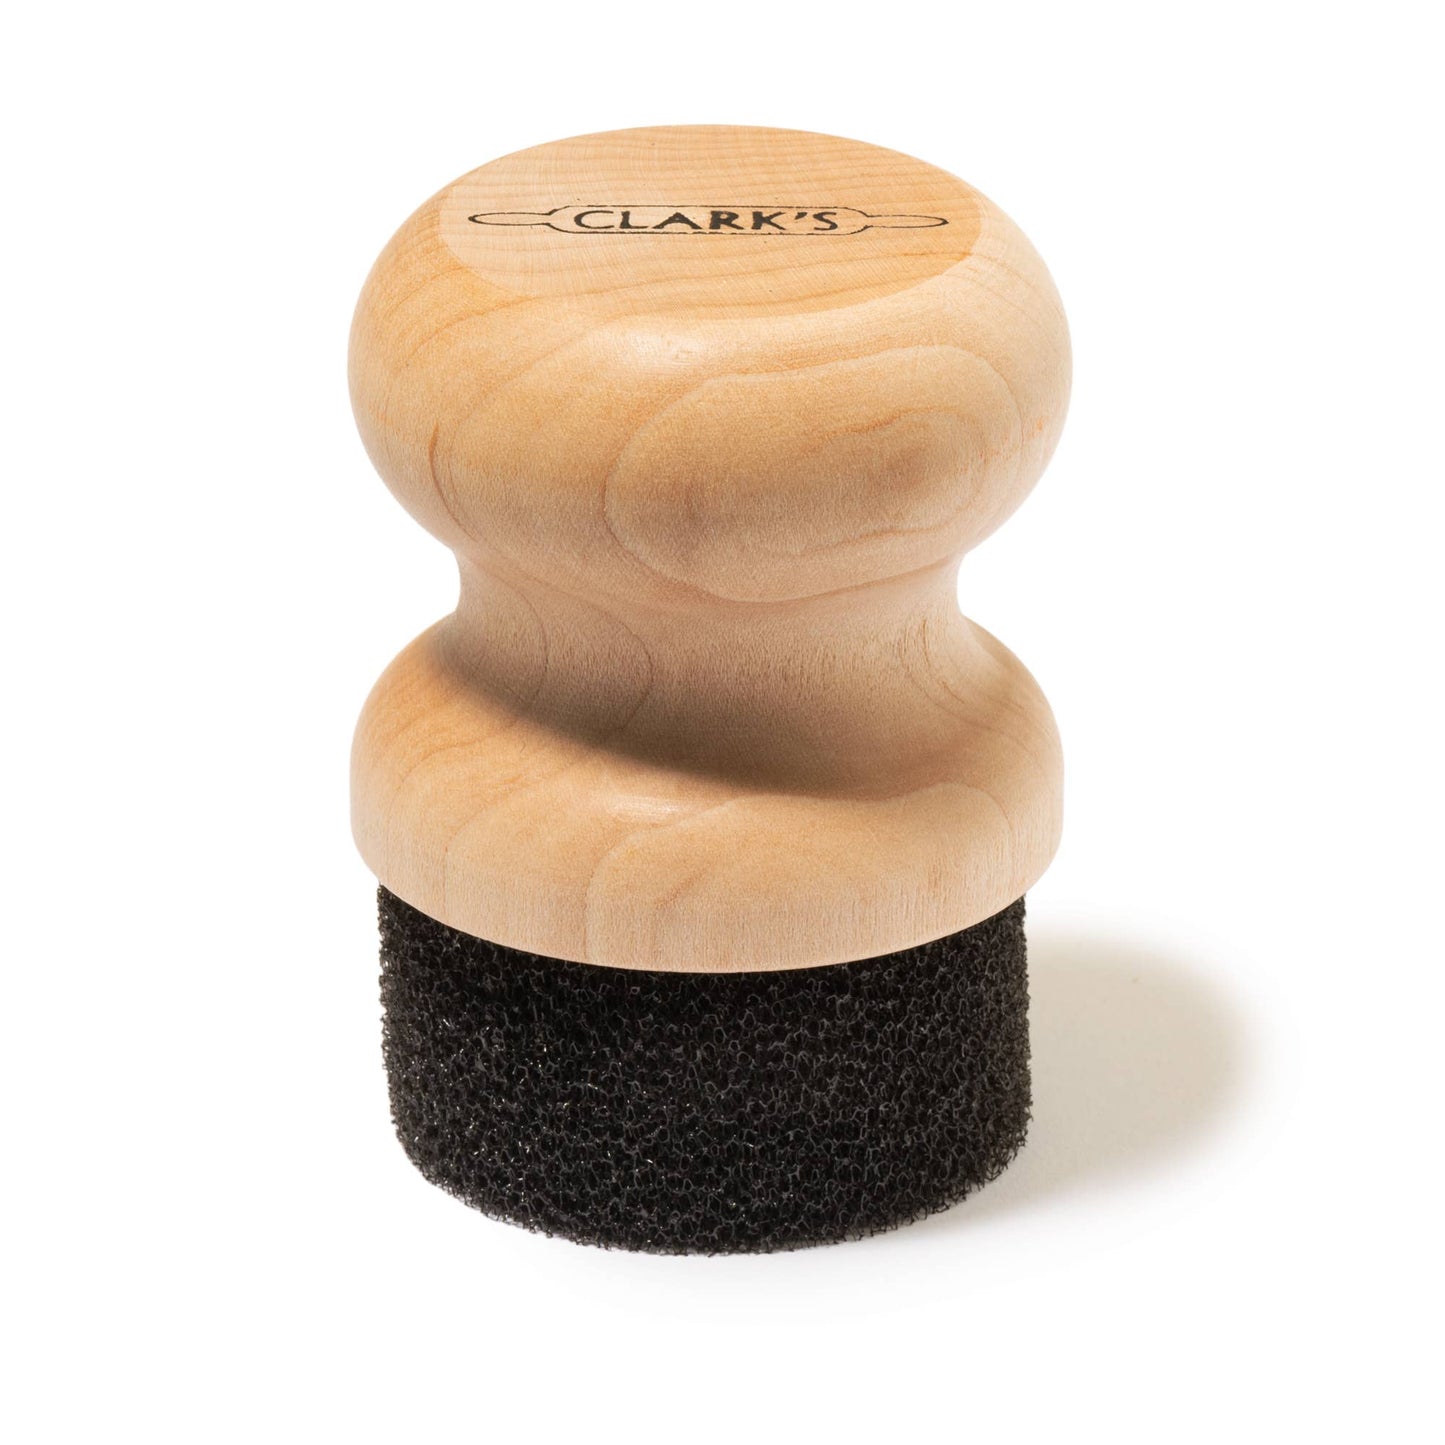 Apply wax and oil easily with CLARK'S round applicator! Its recessed sponge ensures a smooth finish without snagging on edges. Perfect for cutting boards, counters, and more. Lightweight and ergonomically designed for effortless use. Say goodbye to messy paper towels and rags!